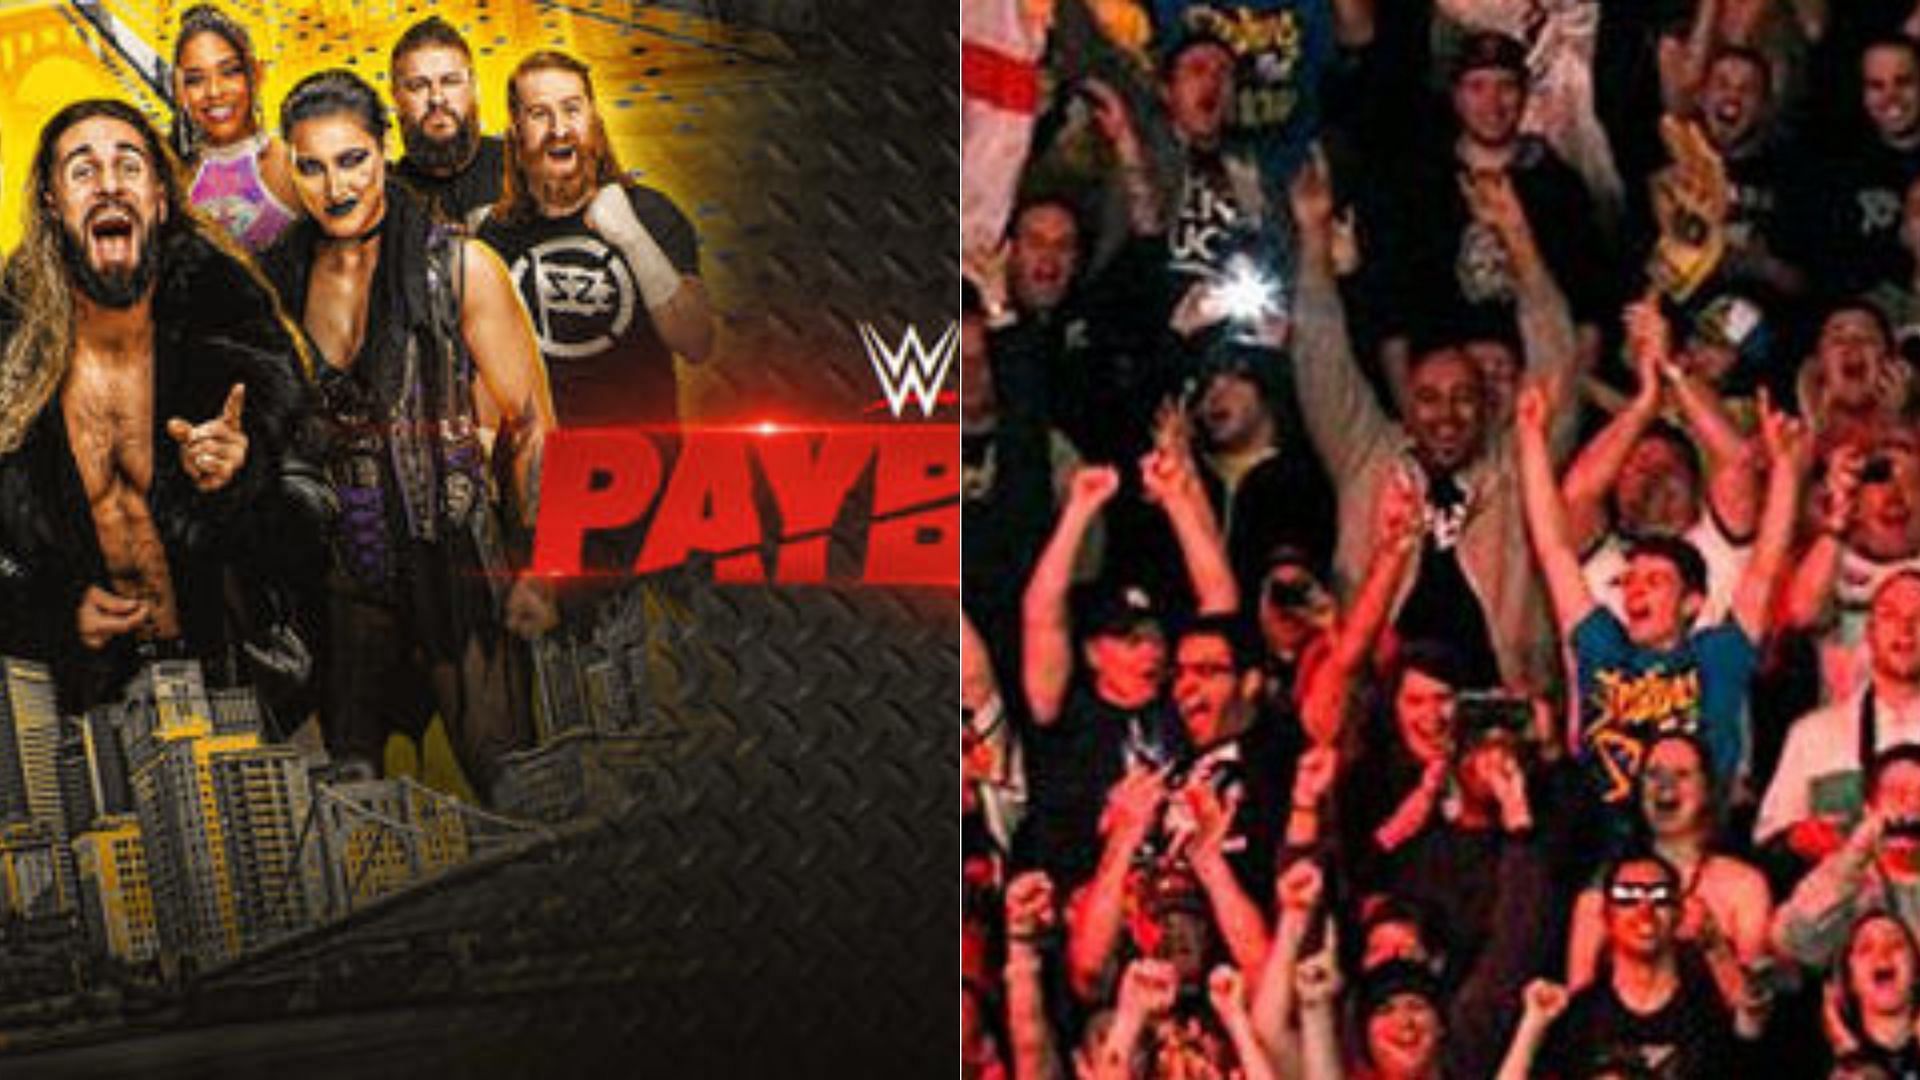 WWE Payback saw a title changing hands